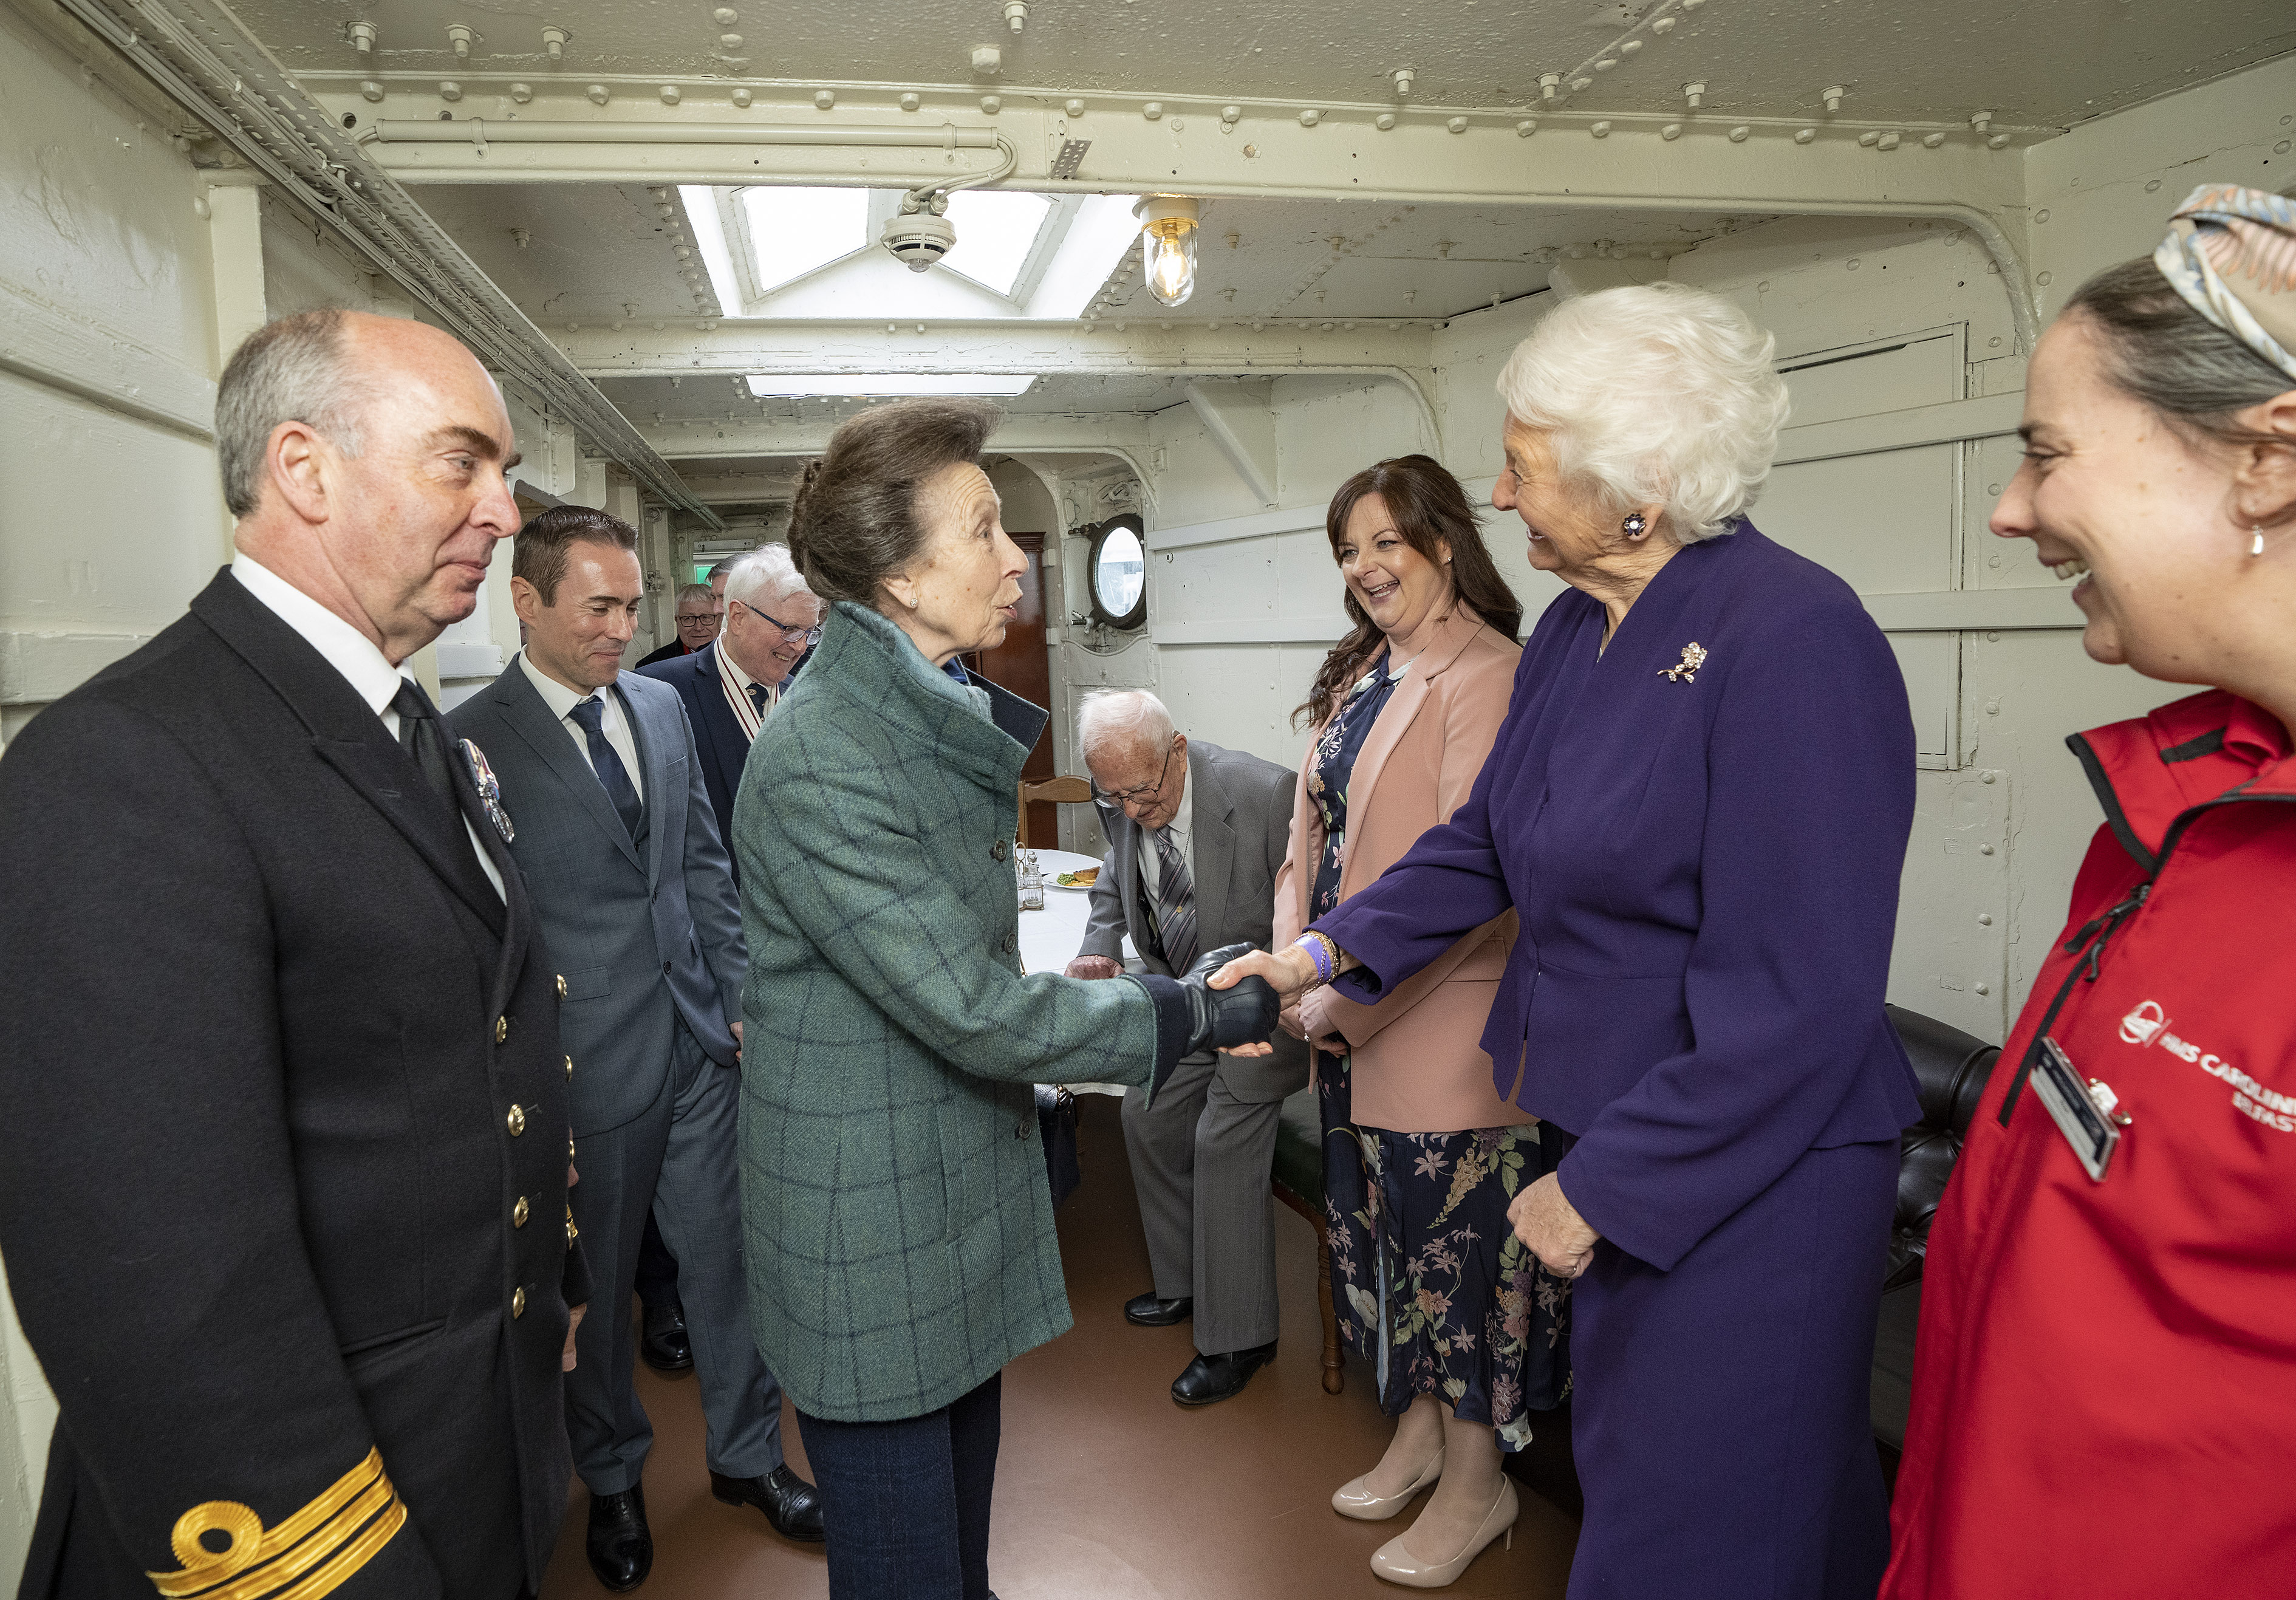 HRH The Princess Royal meeting members of the National Museum of the Royal Navy